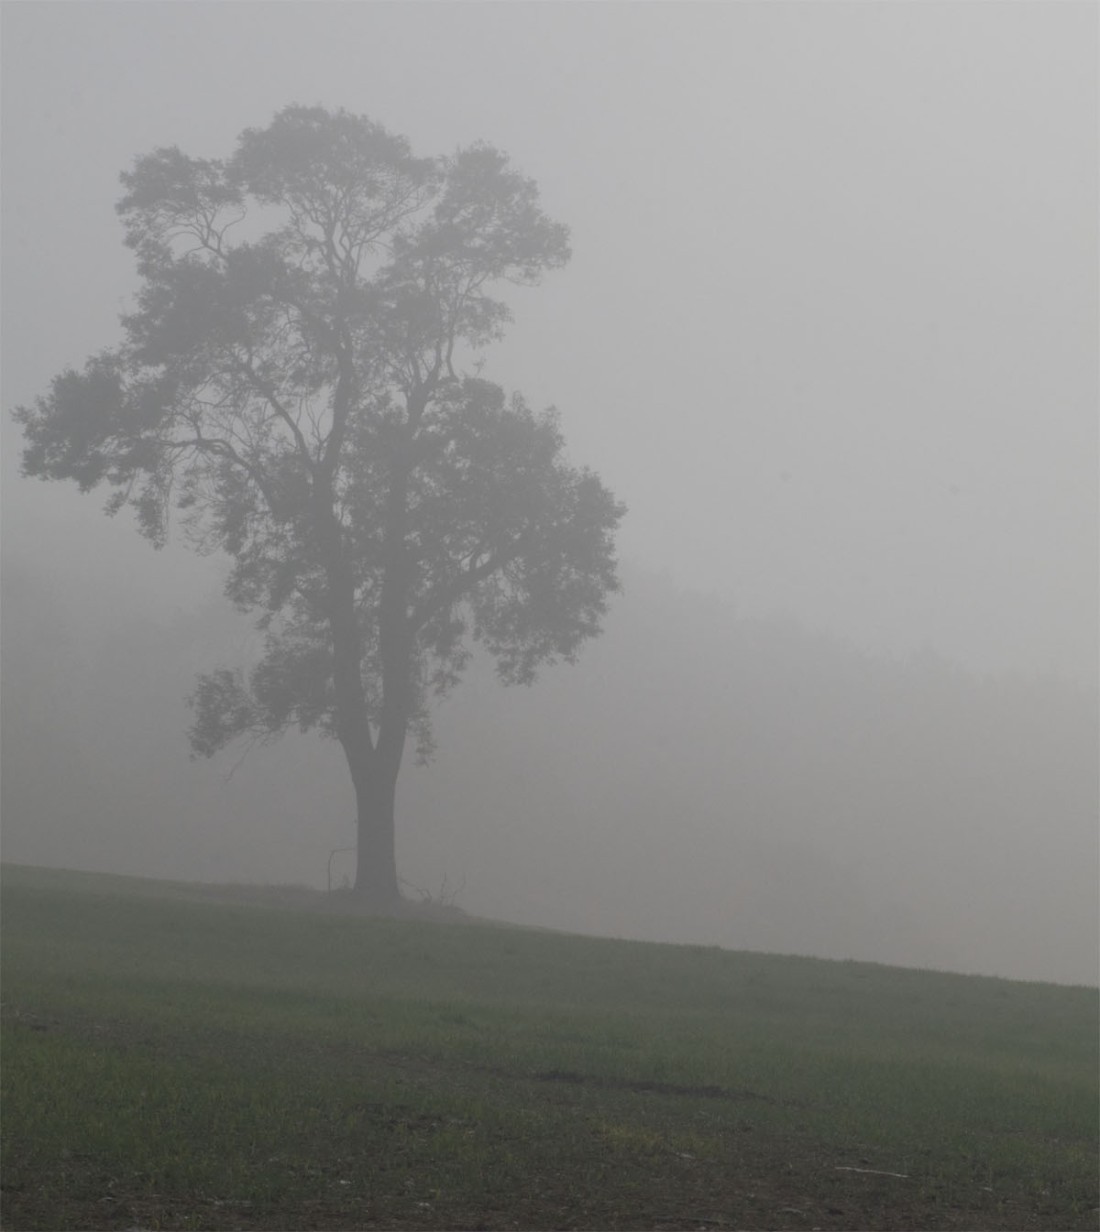 Tree in the mist 27 Sept 2017